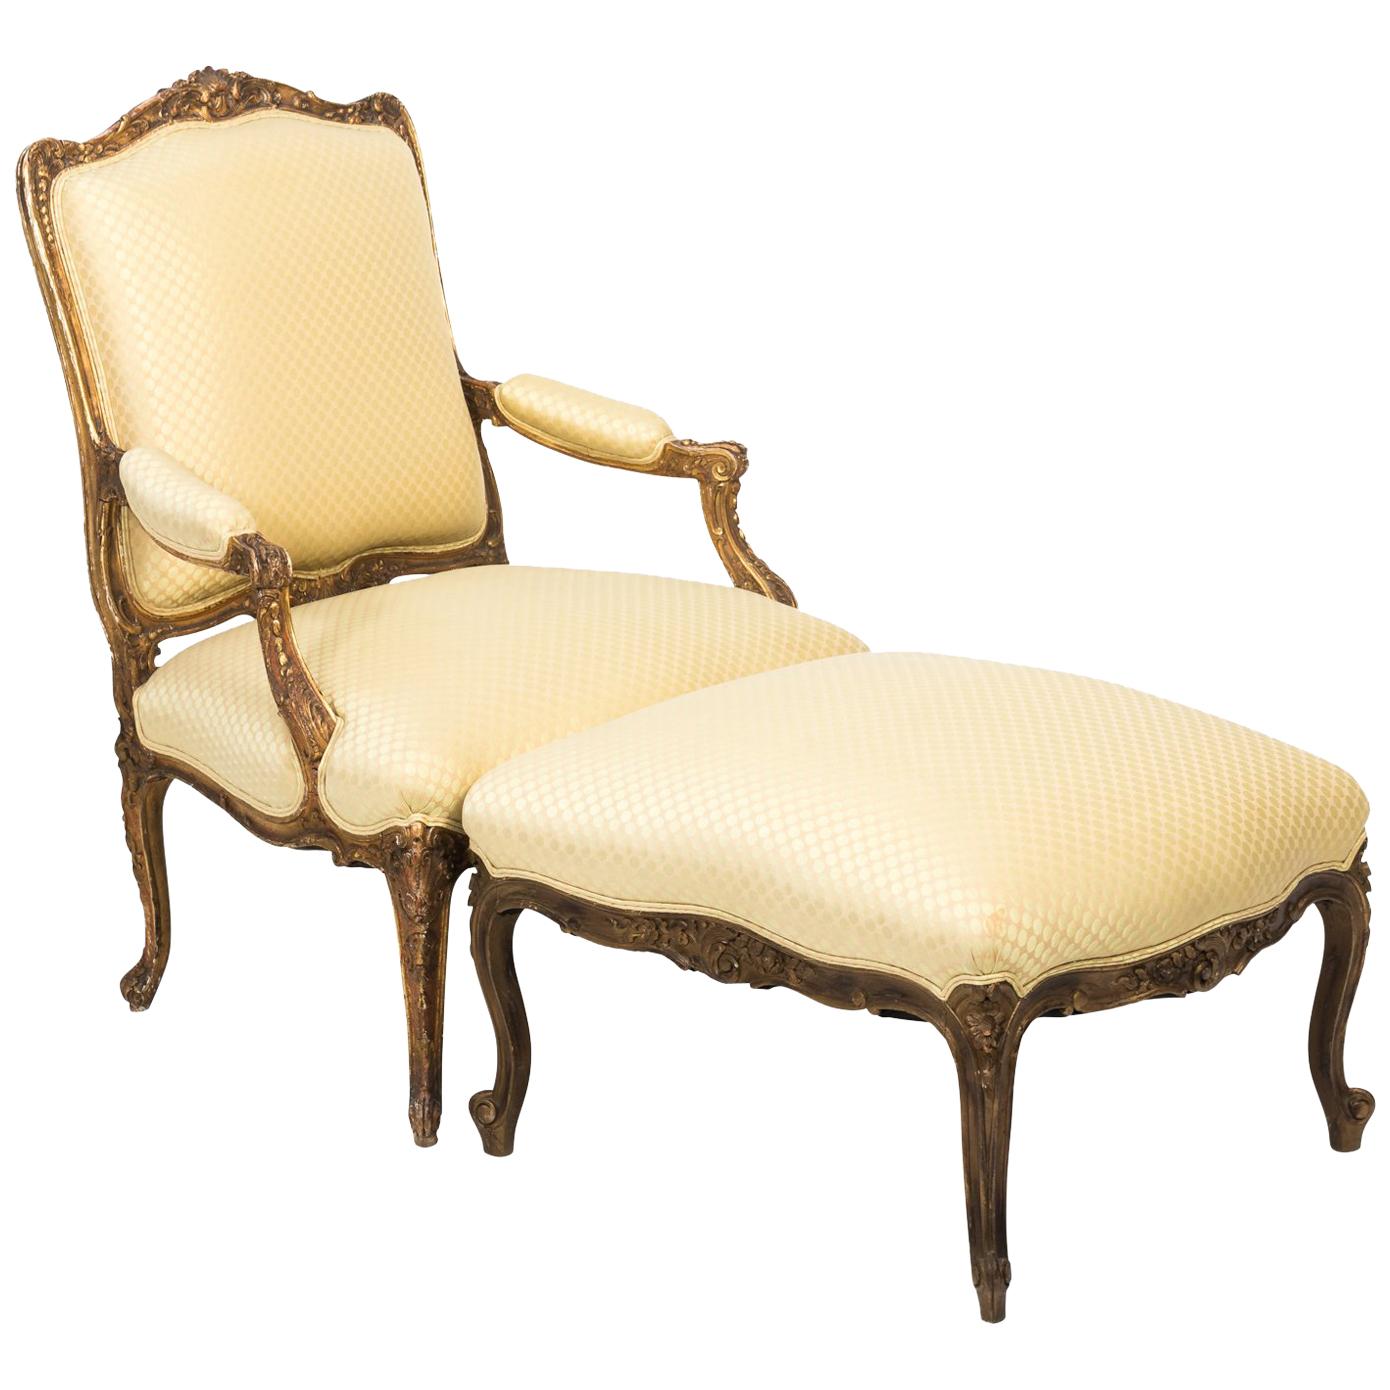 19th Century Giltwood Chaise Lounge Chair